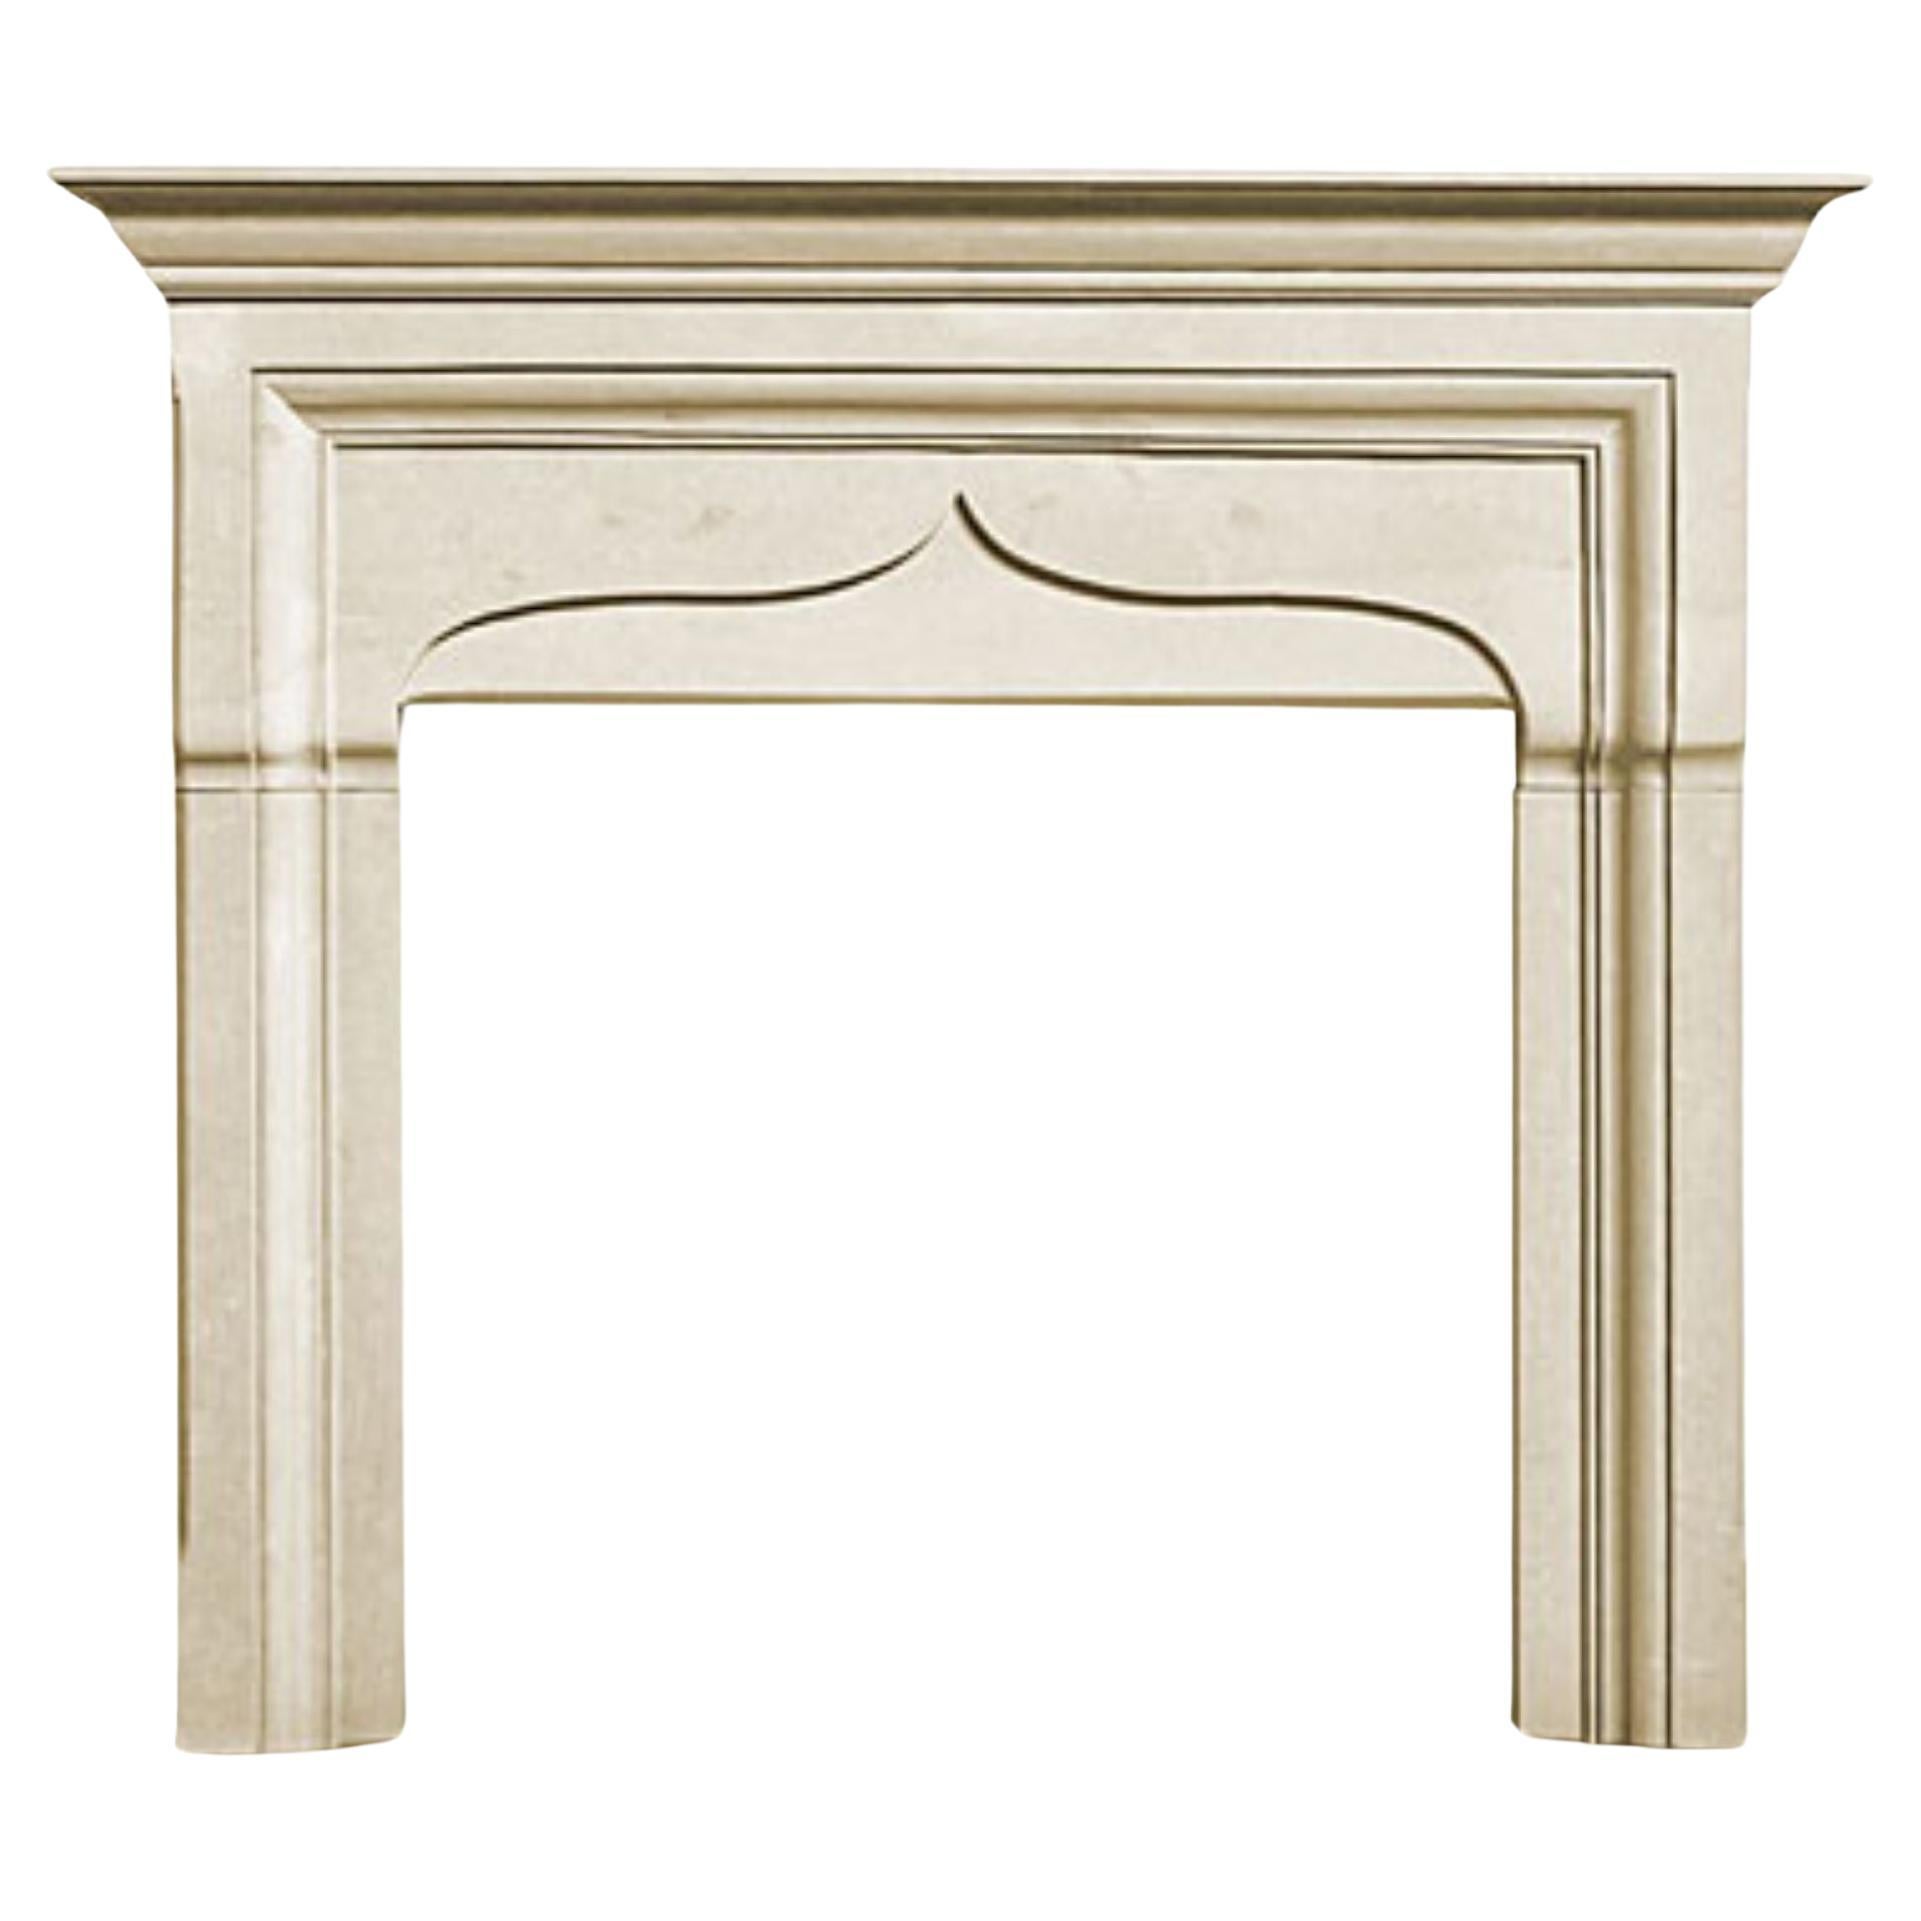 New And Custom Fireplaces and Mantels